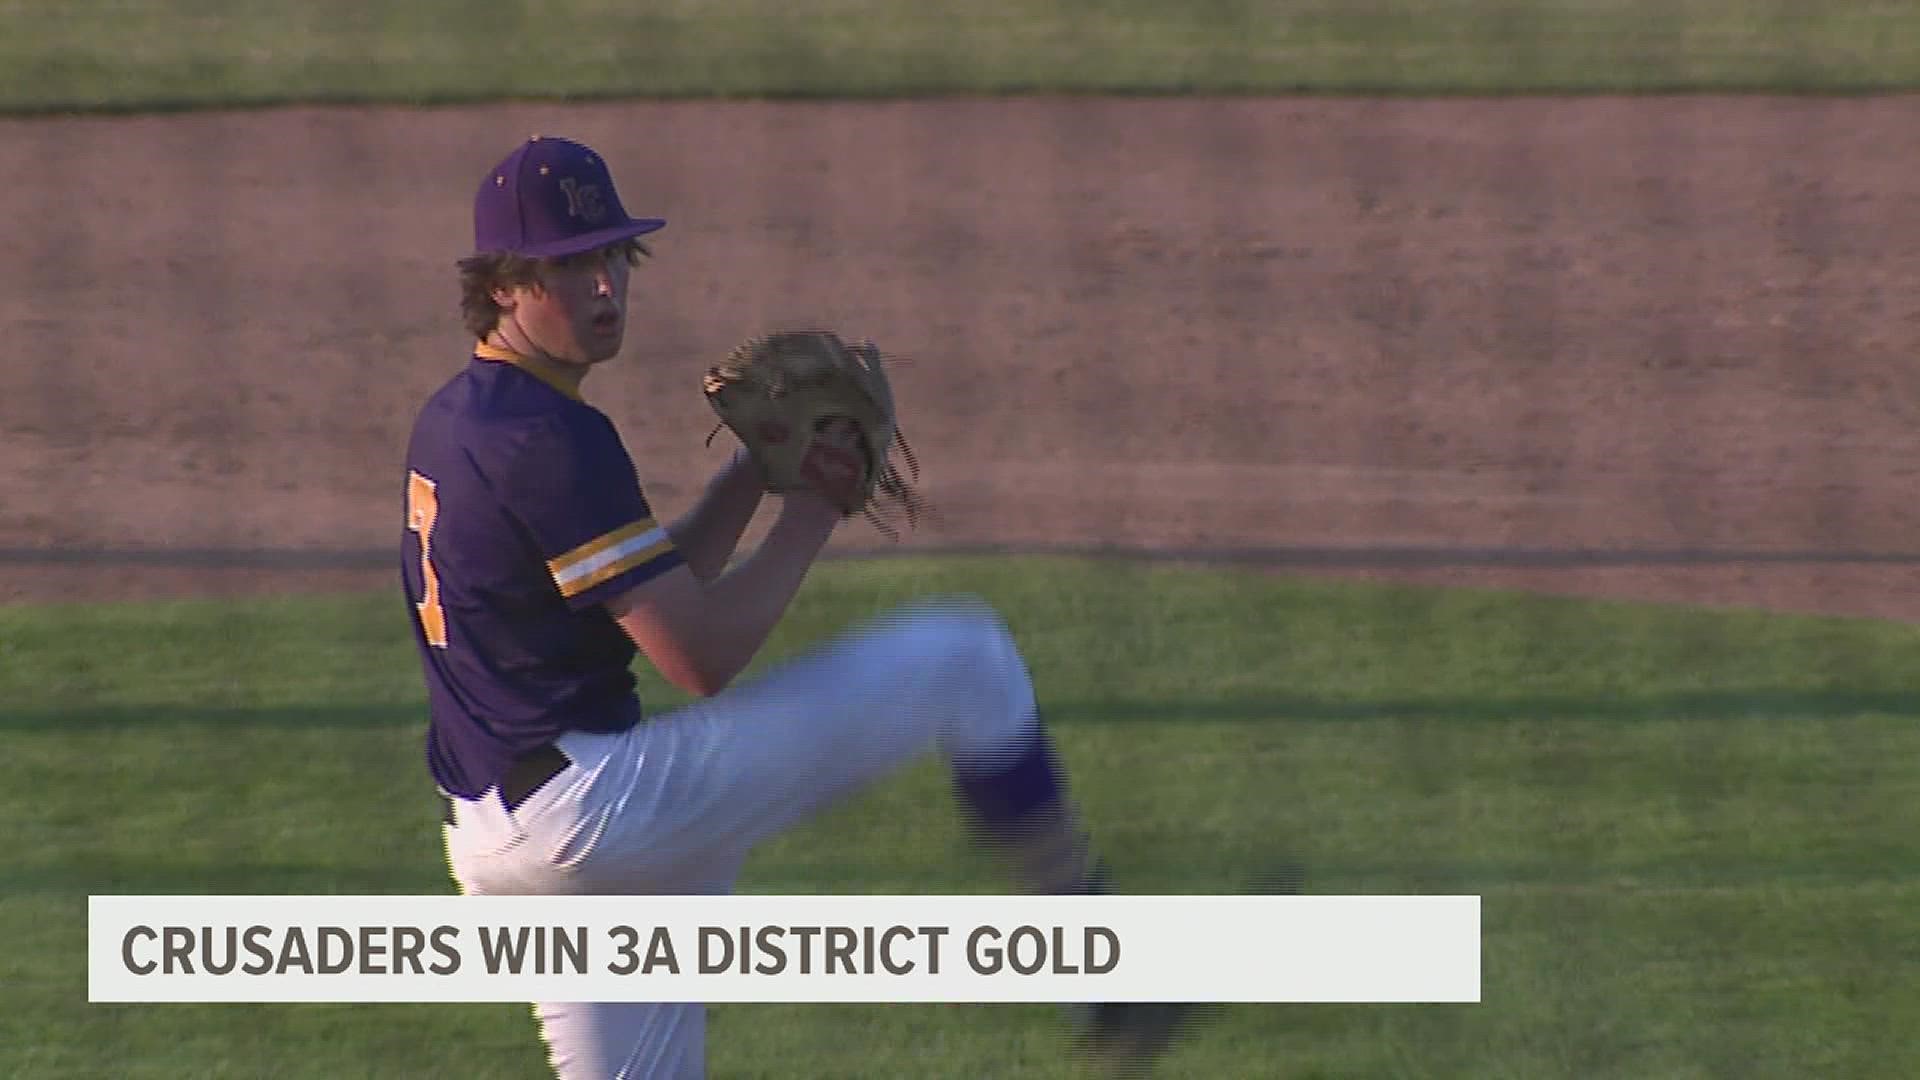 Lancaster Catholic gets "ace" performance from Noah Zimmerman to down Trinity for district gold